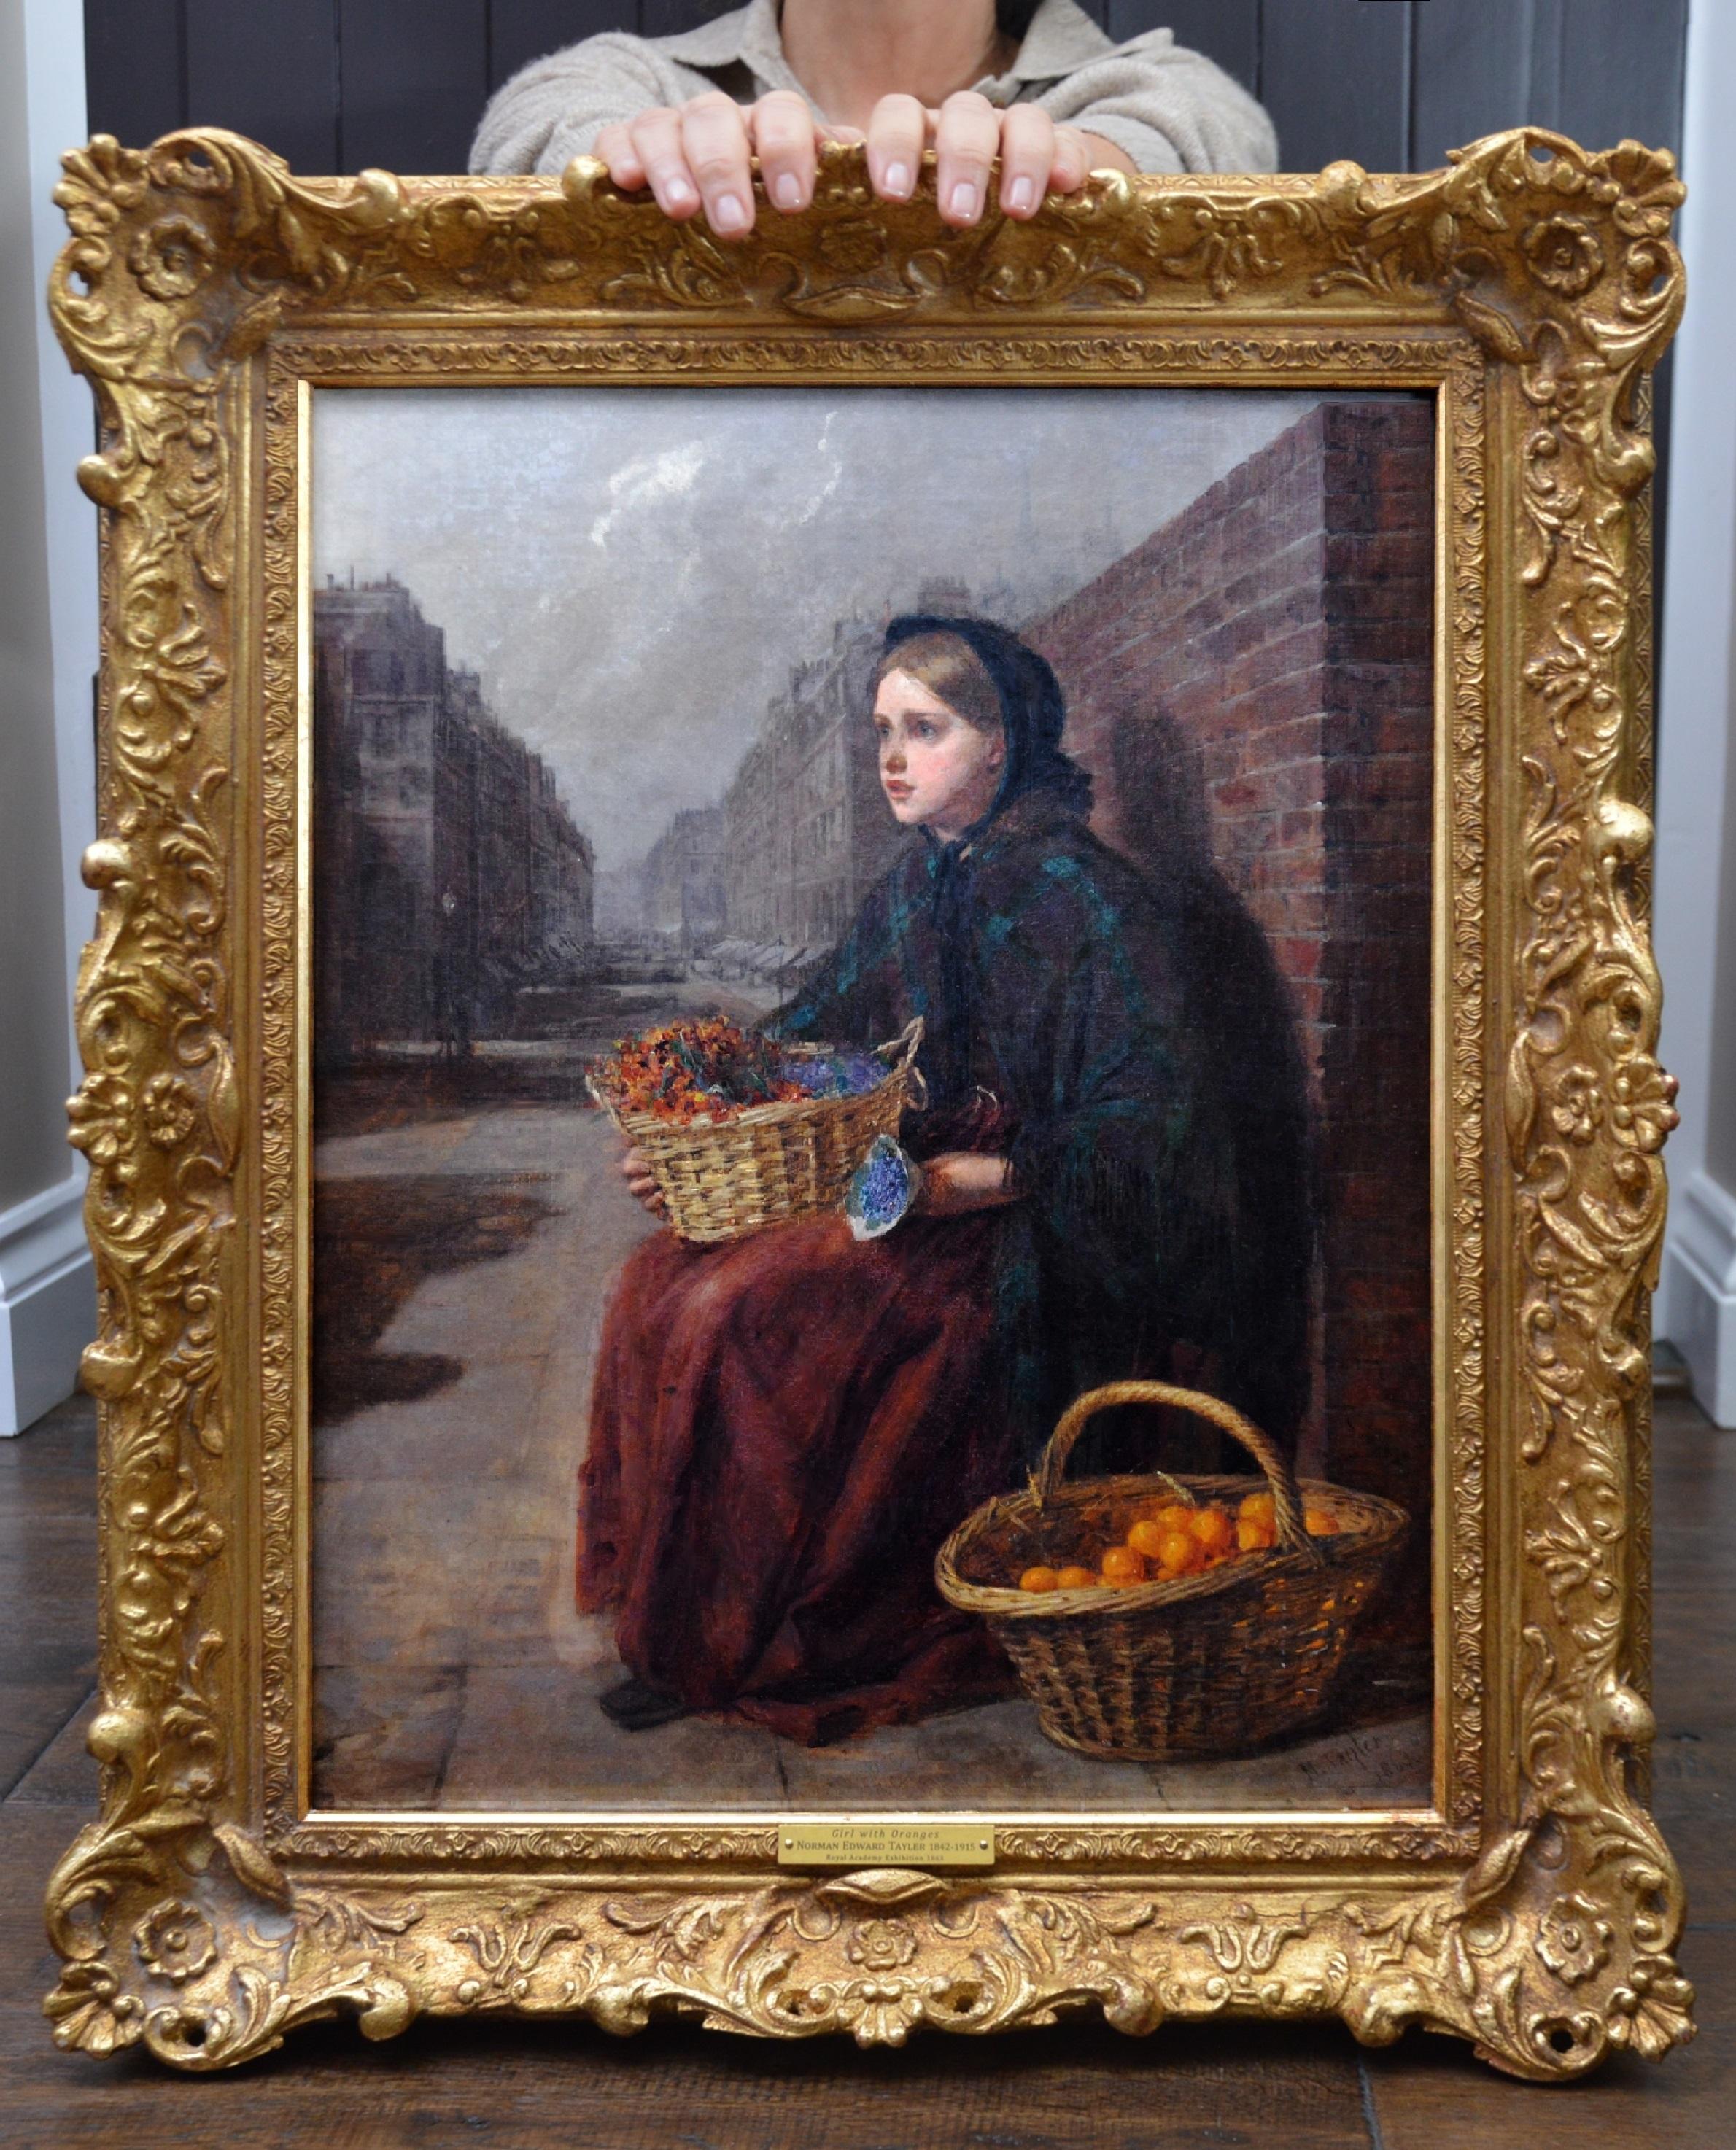 Norman Edward Tayler ARWS Figurative Painting - Girl with Oranges - 19th Century Royal Academy Oil Painting 1863